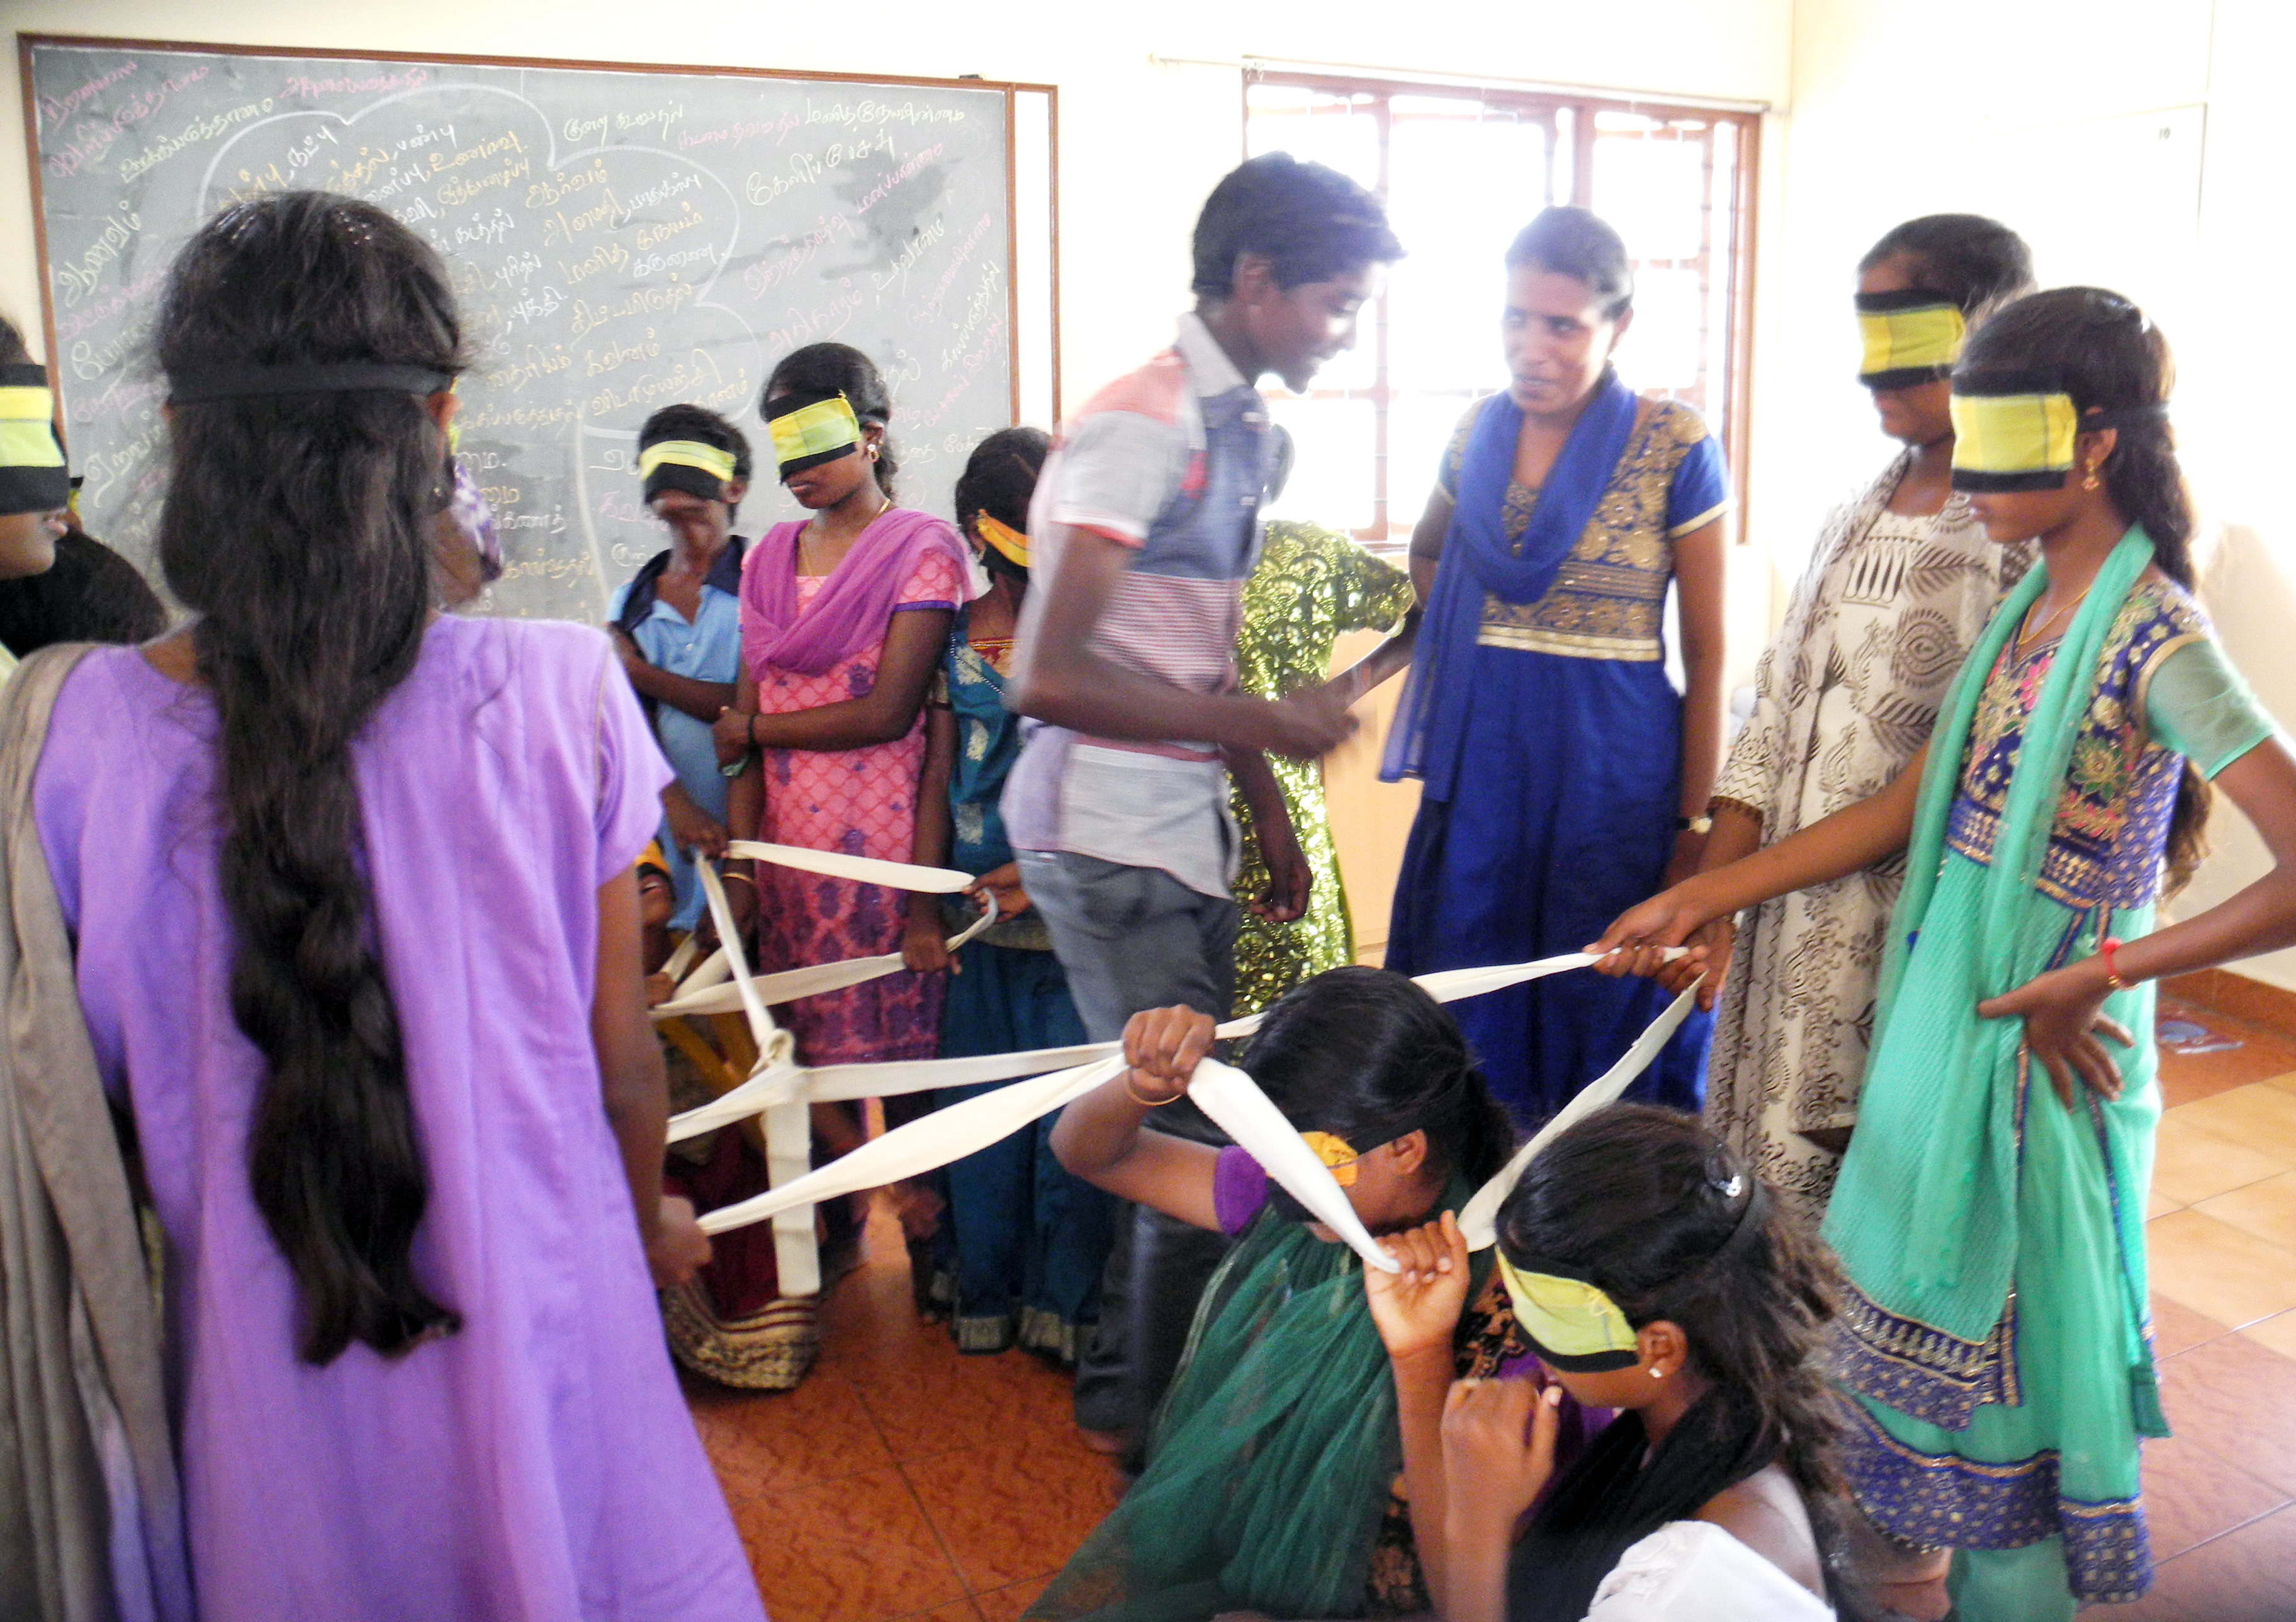 Knowing Your Nature: Play for Peace in Tamil Nadu, Part 2